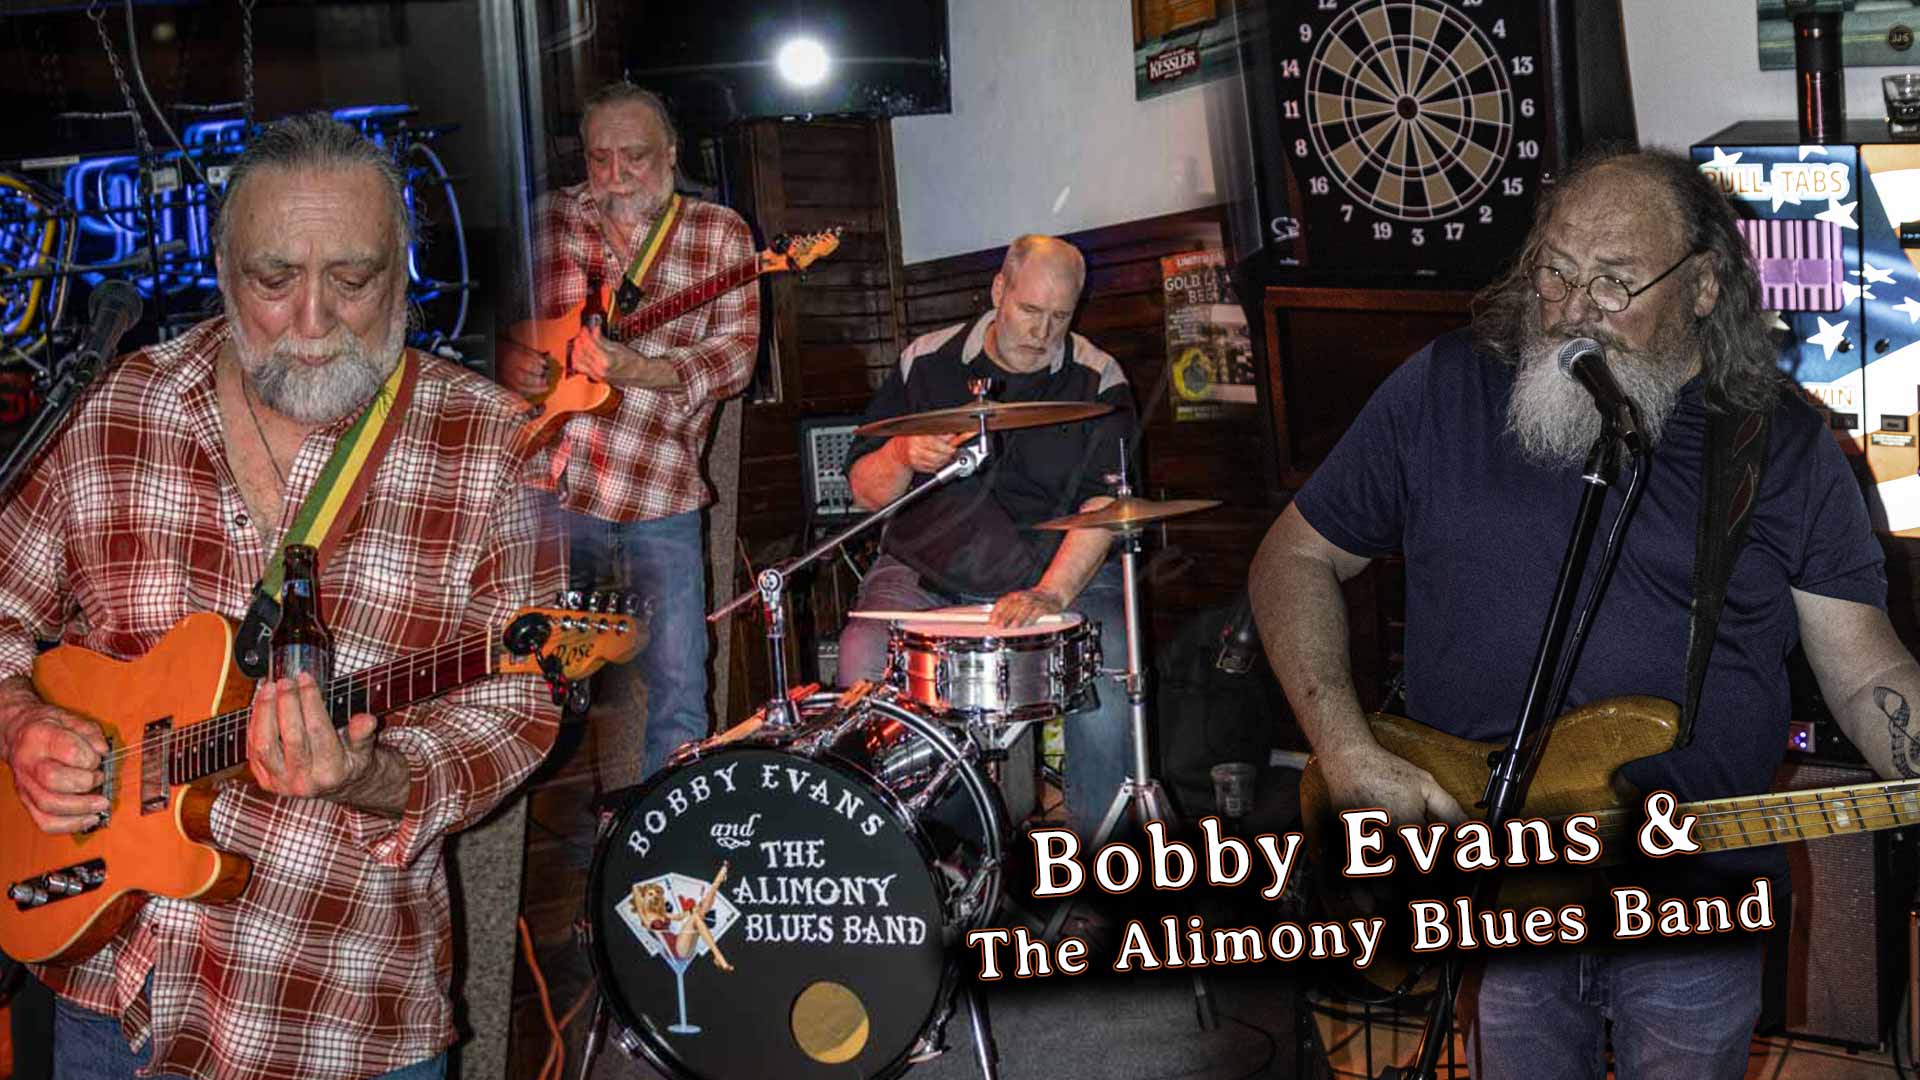 Bobby Evans and the Alimony Blues Band at Plank Road Pub in Menasha